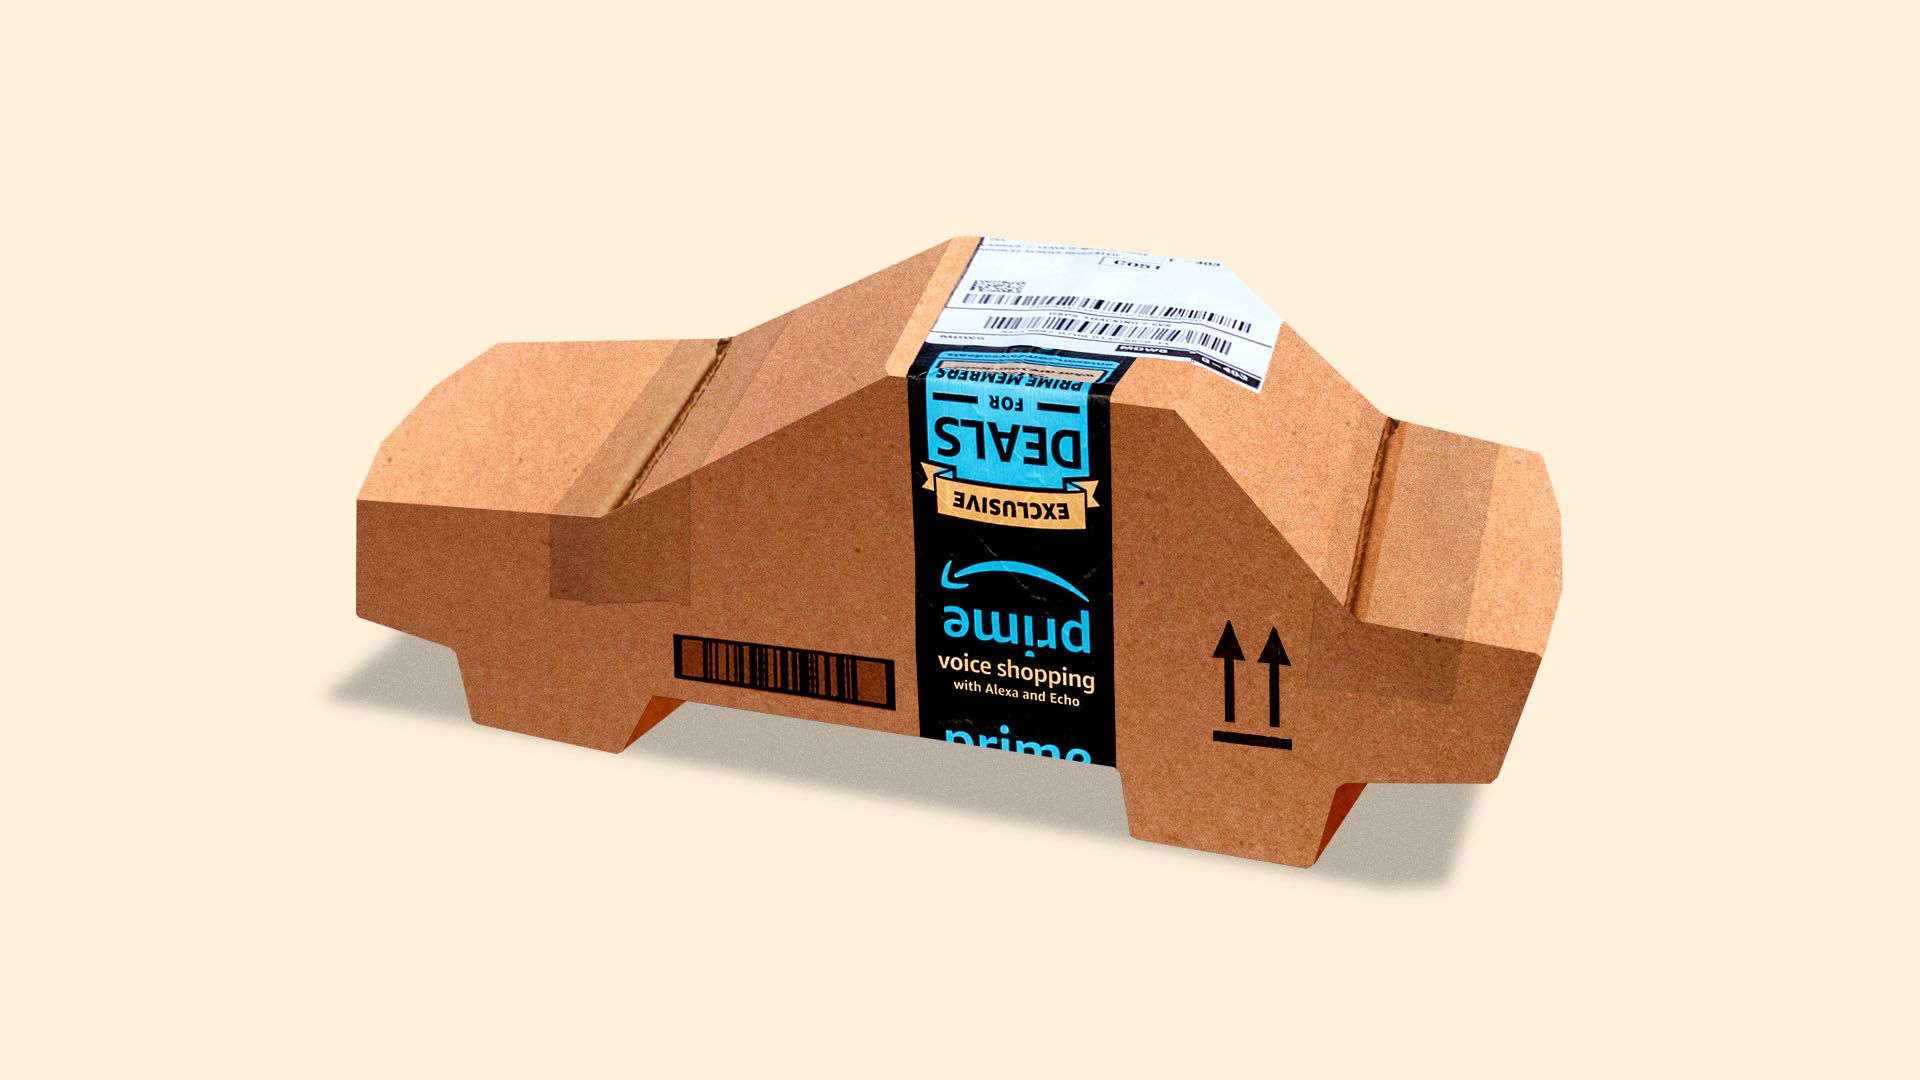 In this illustration, a cardboard Amazon delivery box is fashioned into the shape of a car.